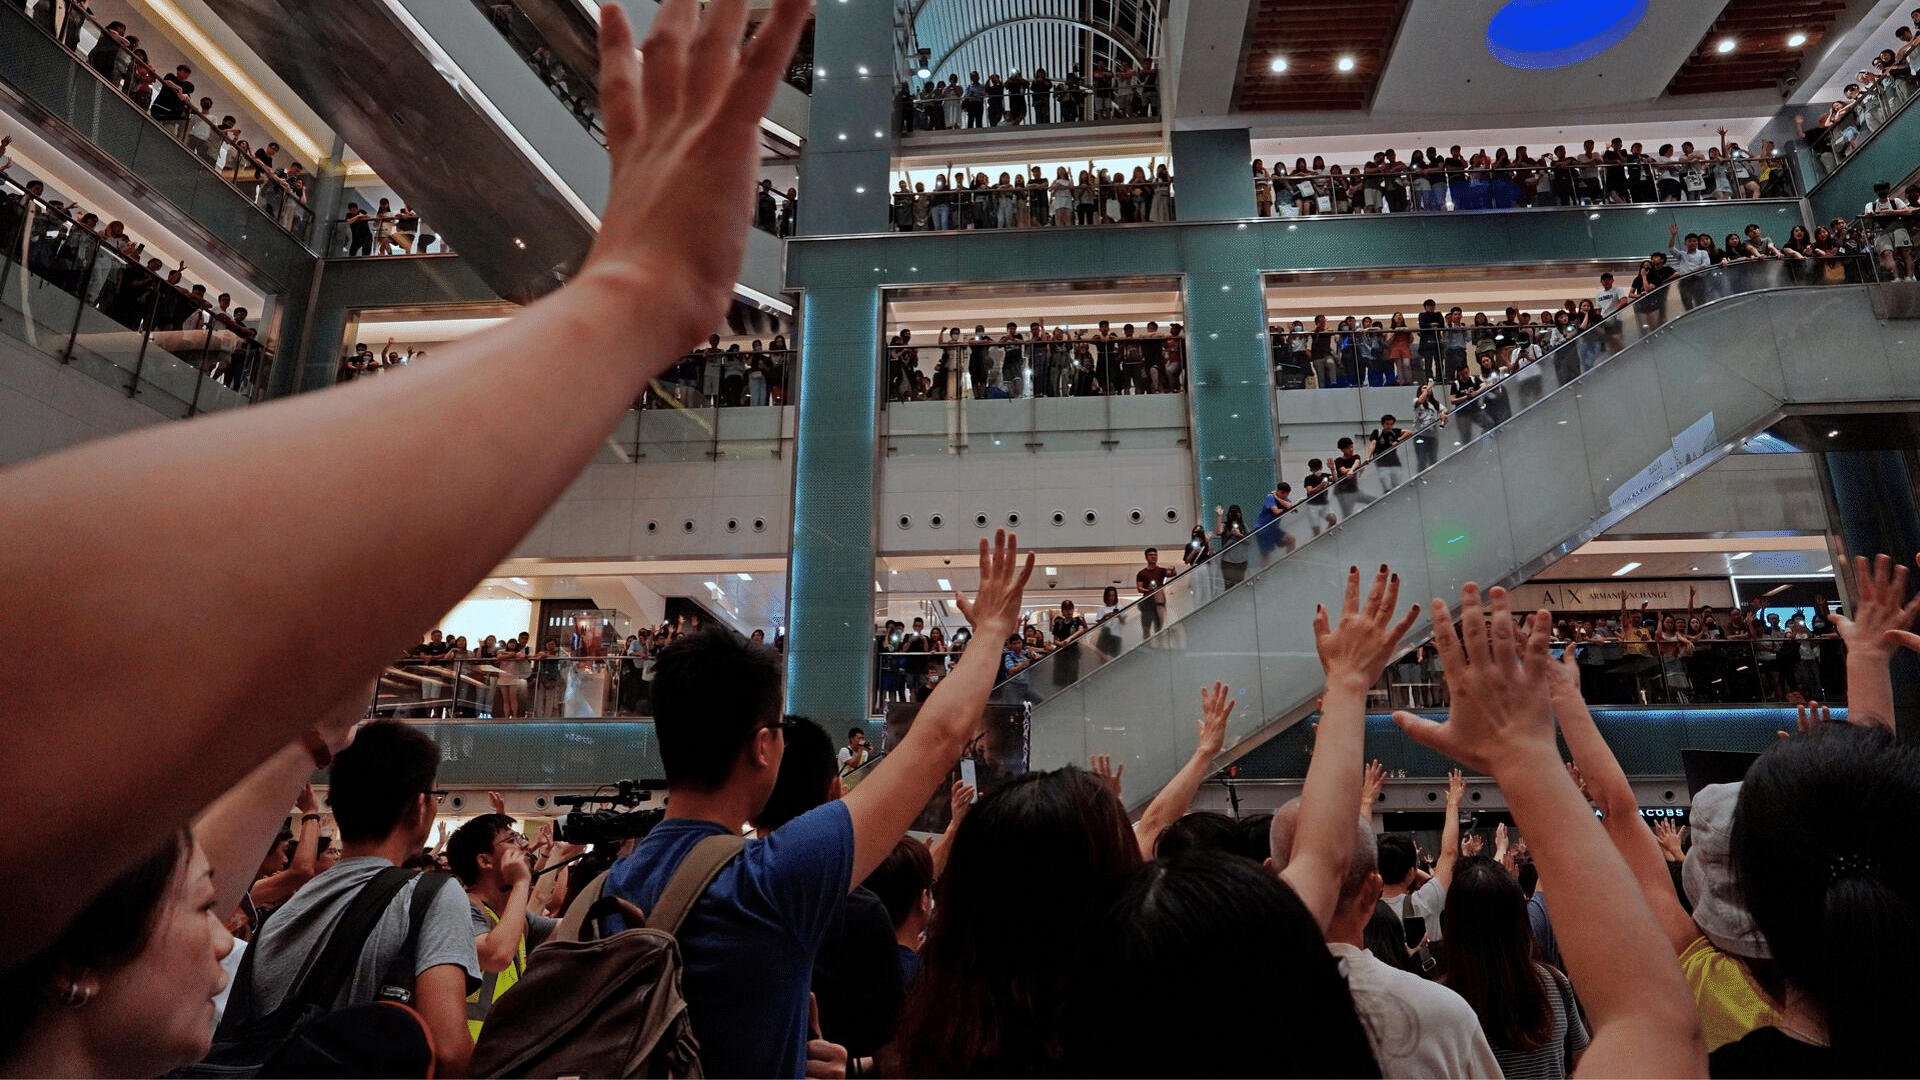 The protesters have adopted the song – “ Glory to Hong Kong” – penned anonymously, as their anthem.&nbsp;